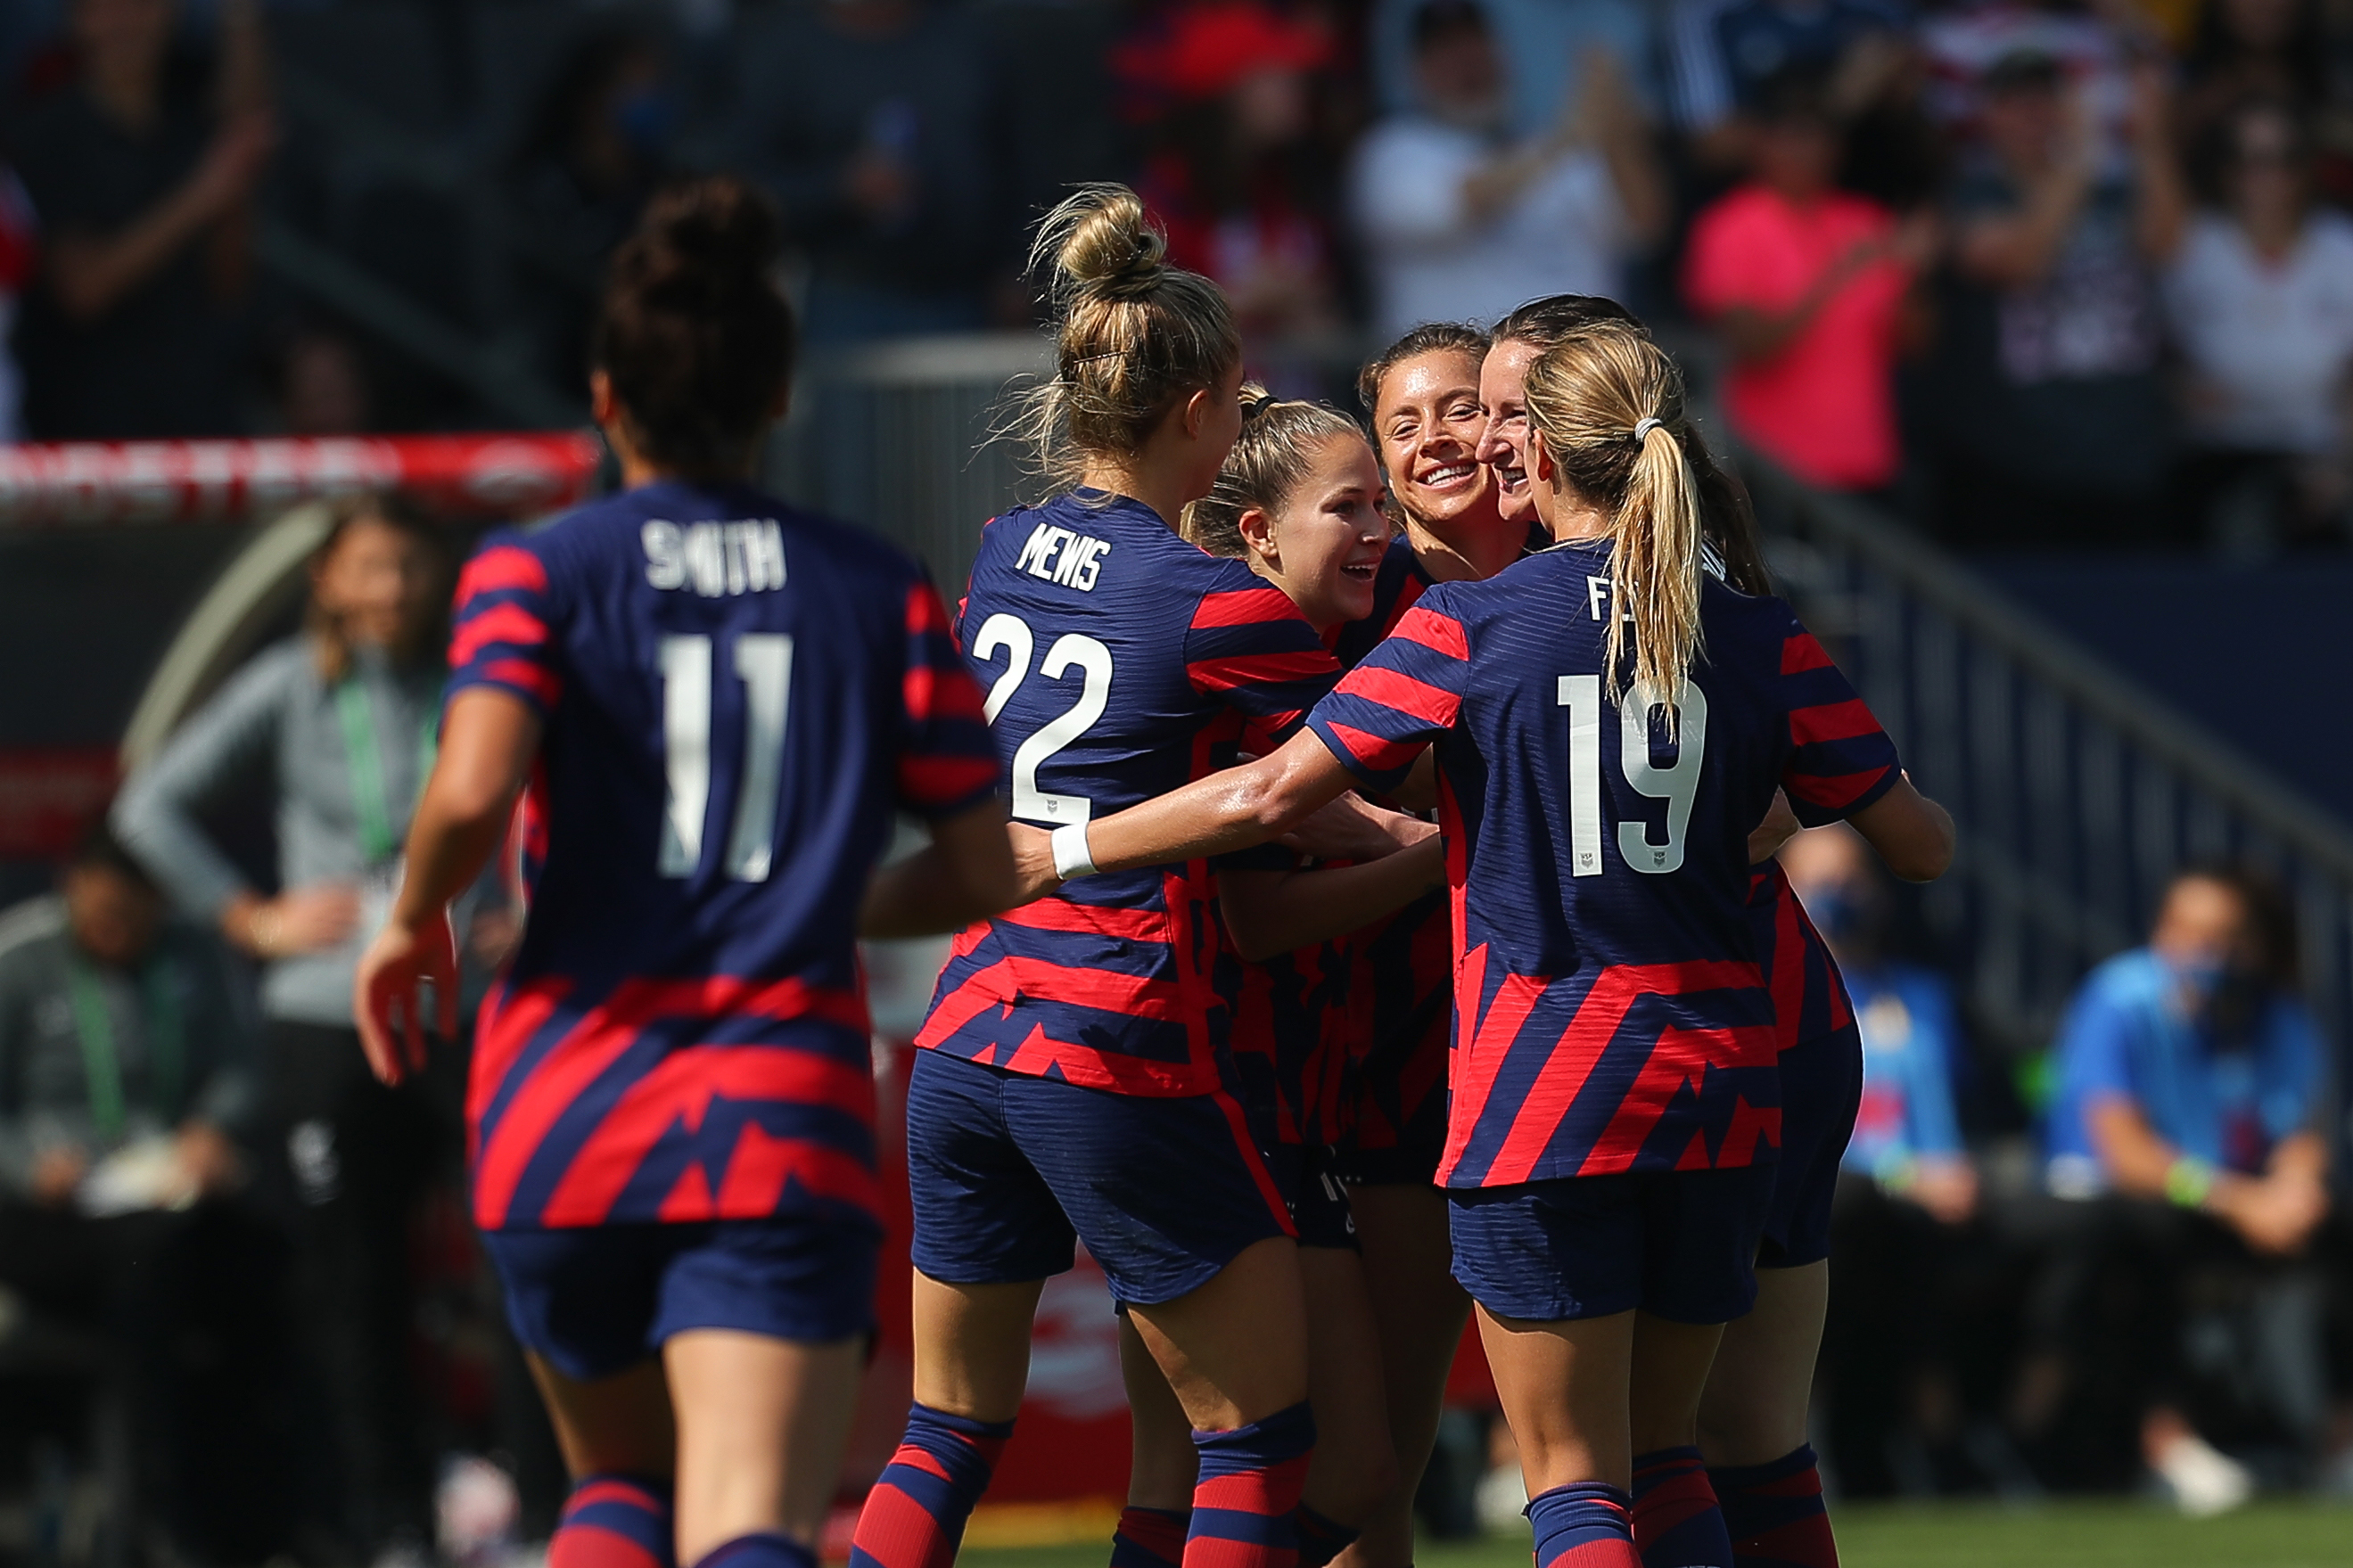 CARSON, CA - FEBRUARY 20: United States players celebrate a second own goal in their favor during a match between New Zealand and United States as part of SheBelieves Cup 2022 at Dignity Health Sports Park on February 20, 2022 in Carson, California. (Photo by Omar Vega/Getty Images)